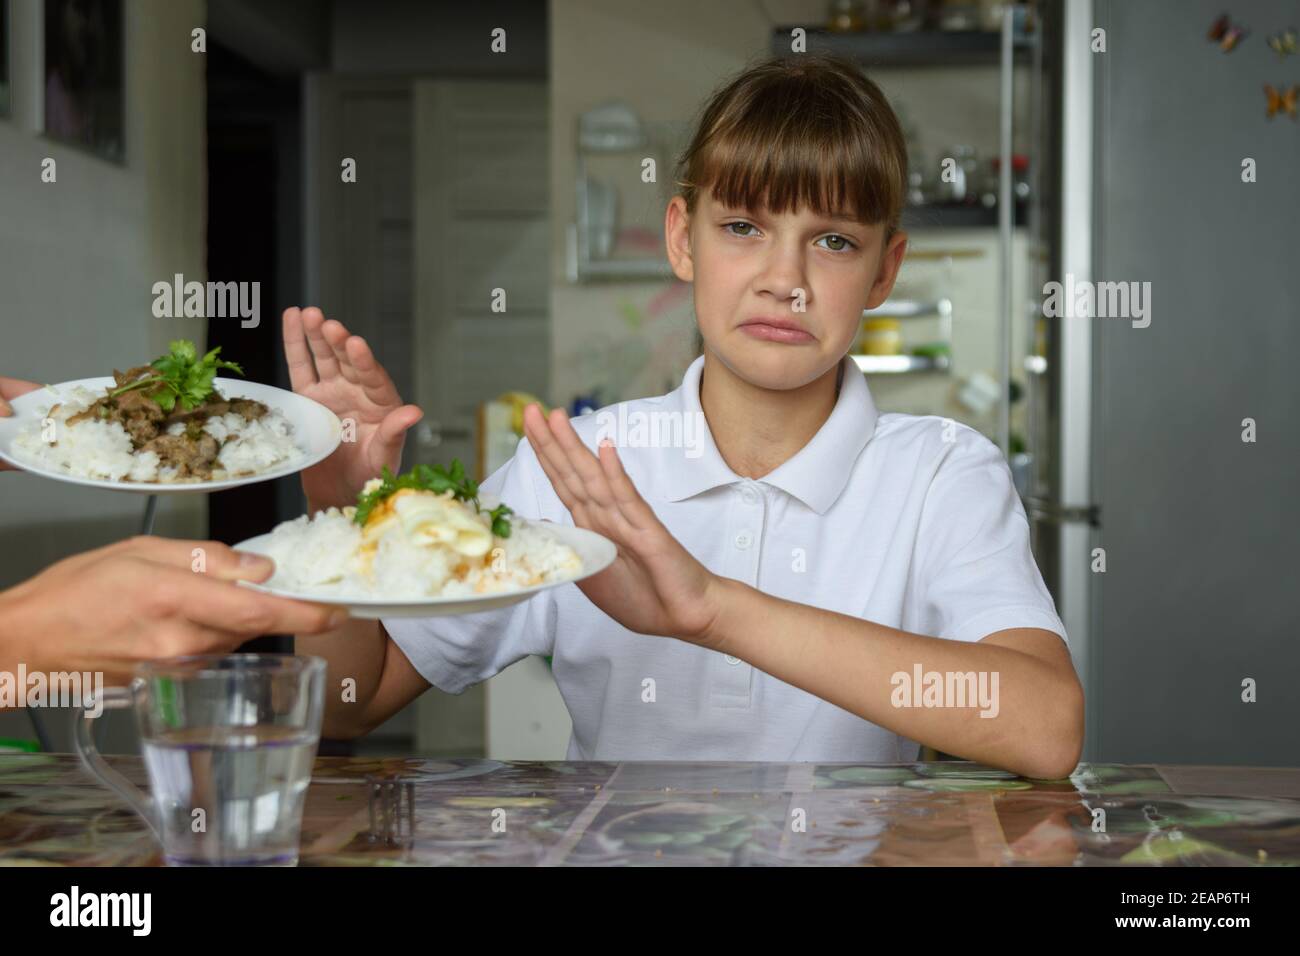 The girl refuses to eat and looks sadly into the frame Stock Photo